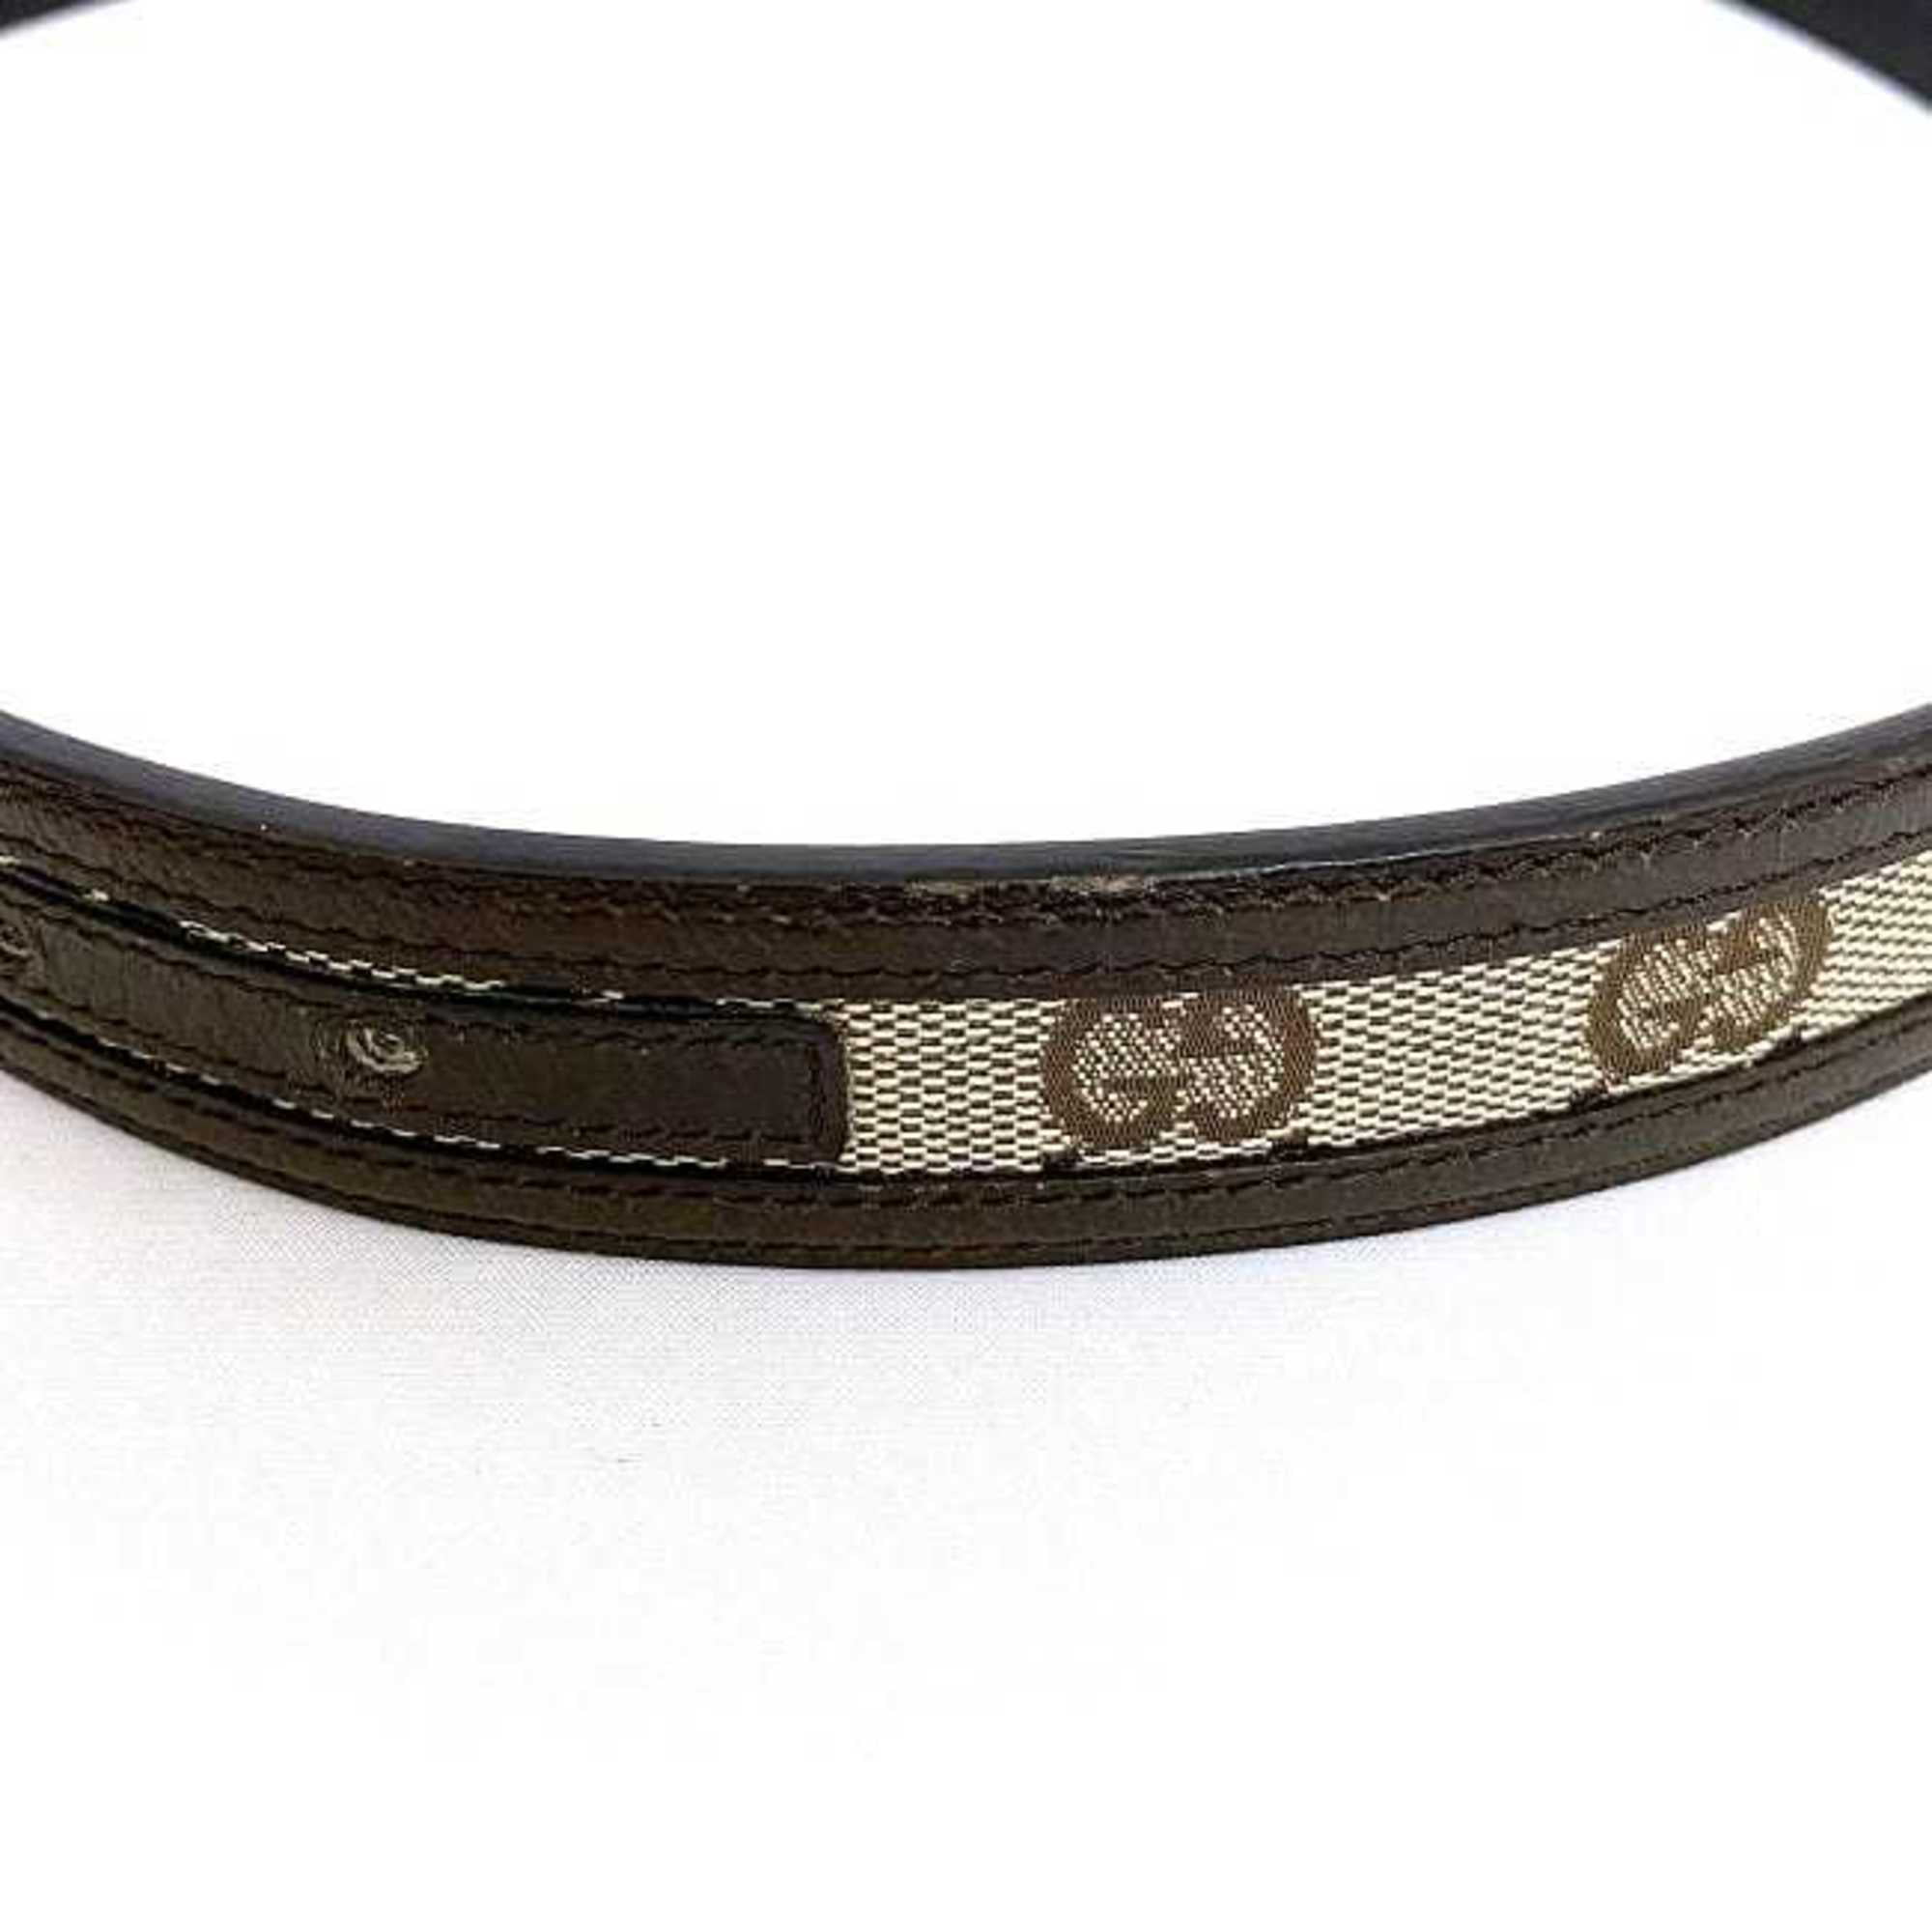 Authenticated Used Gucci belt beige brown silver interlocking 114876 40mm  canvas leather GUCCI waist long GG men 